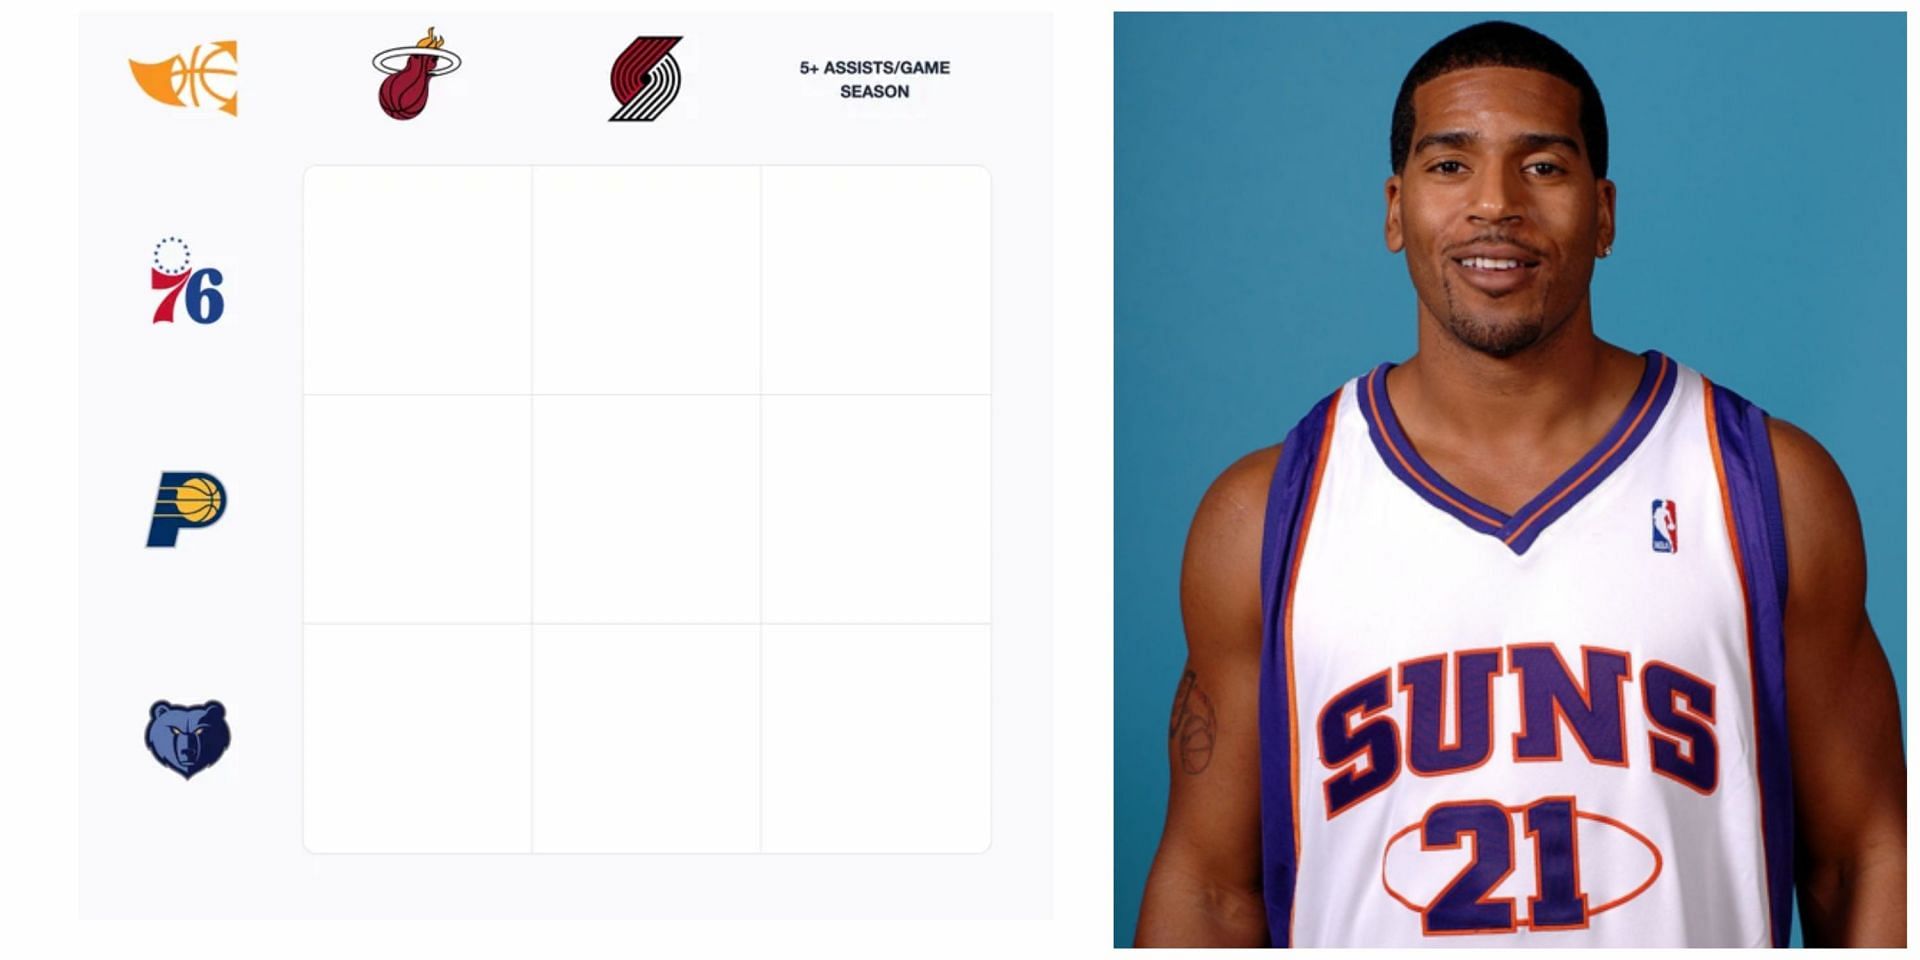 Which Sixers players have also played for Heat and Trail Blazers? NBA Immaculate Grid answers for September 17